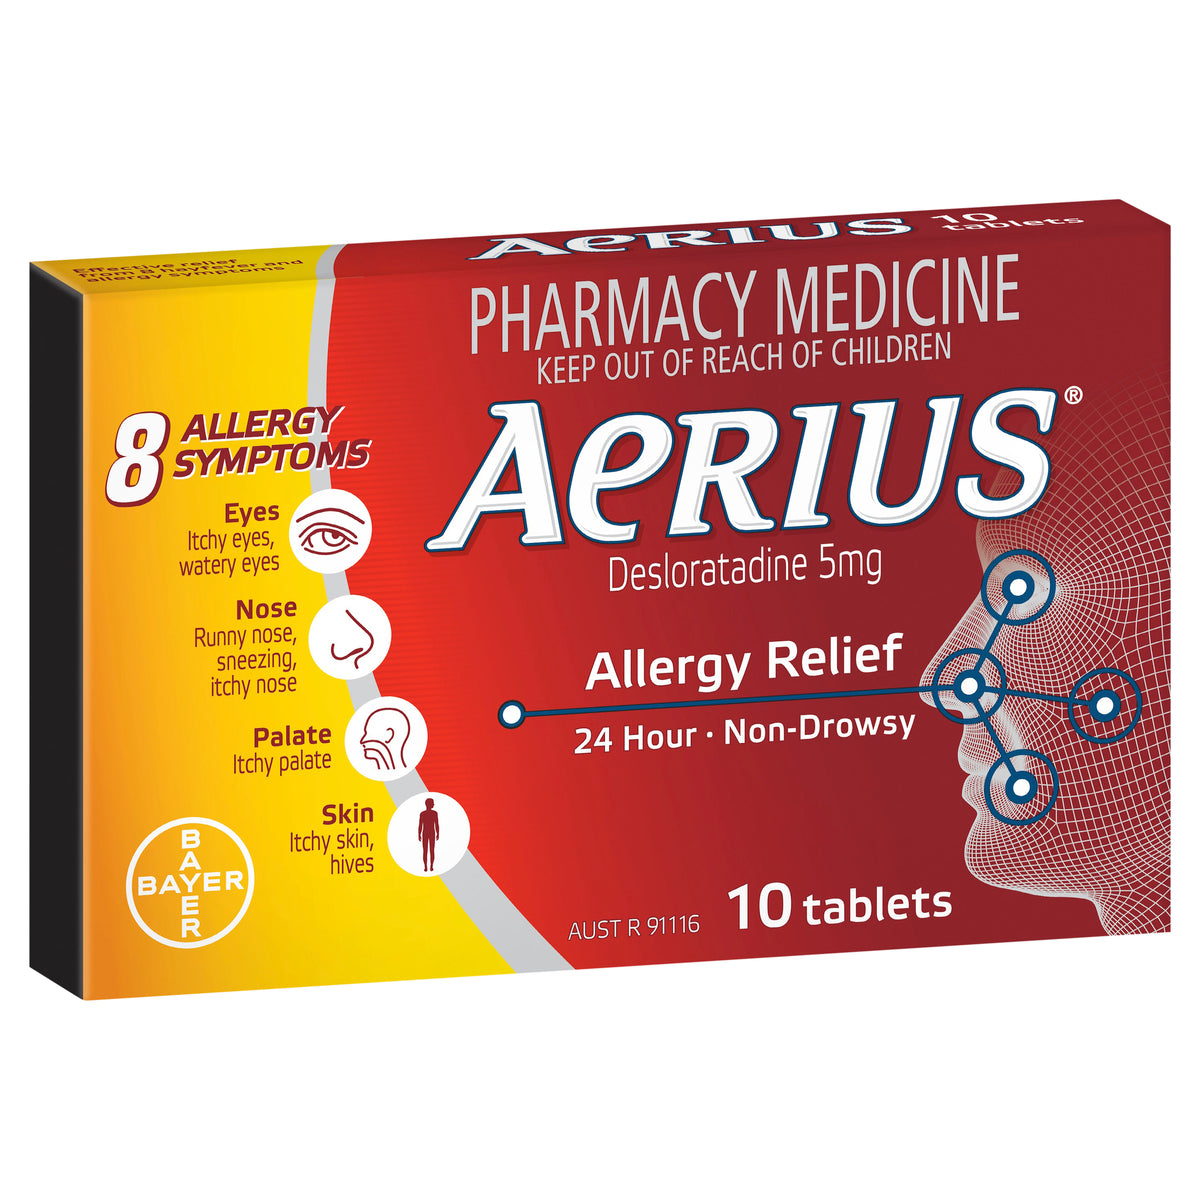 Aerius 24 Hour Non Drowsy Allergy Relief Antihistamine Tablets 10 pack